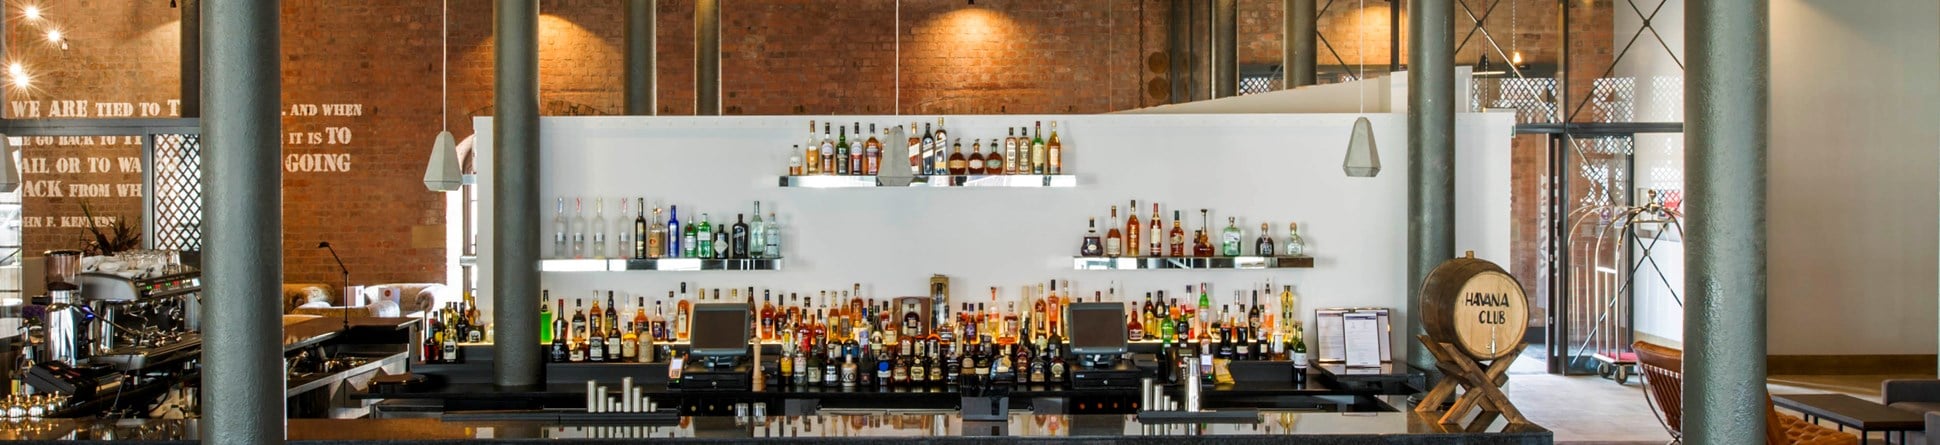 Chairs lined up at a bar in a high-ceilinged room with iron pillars and a red brick wall.